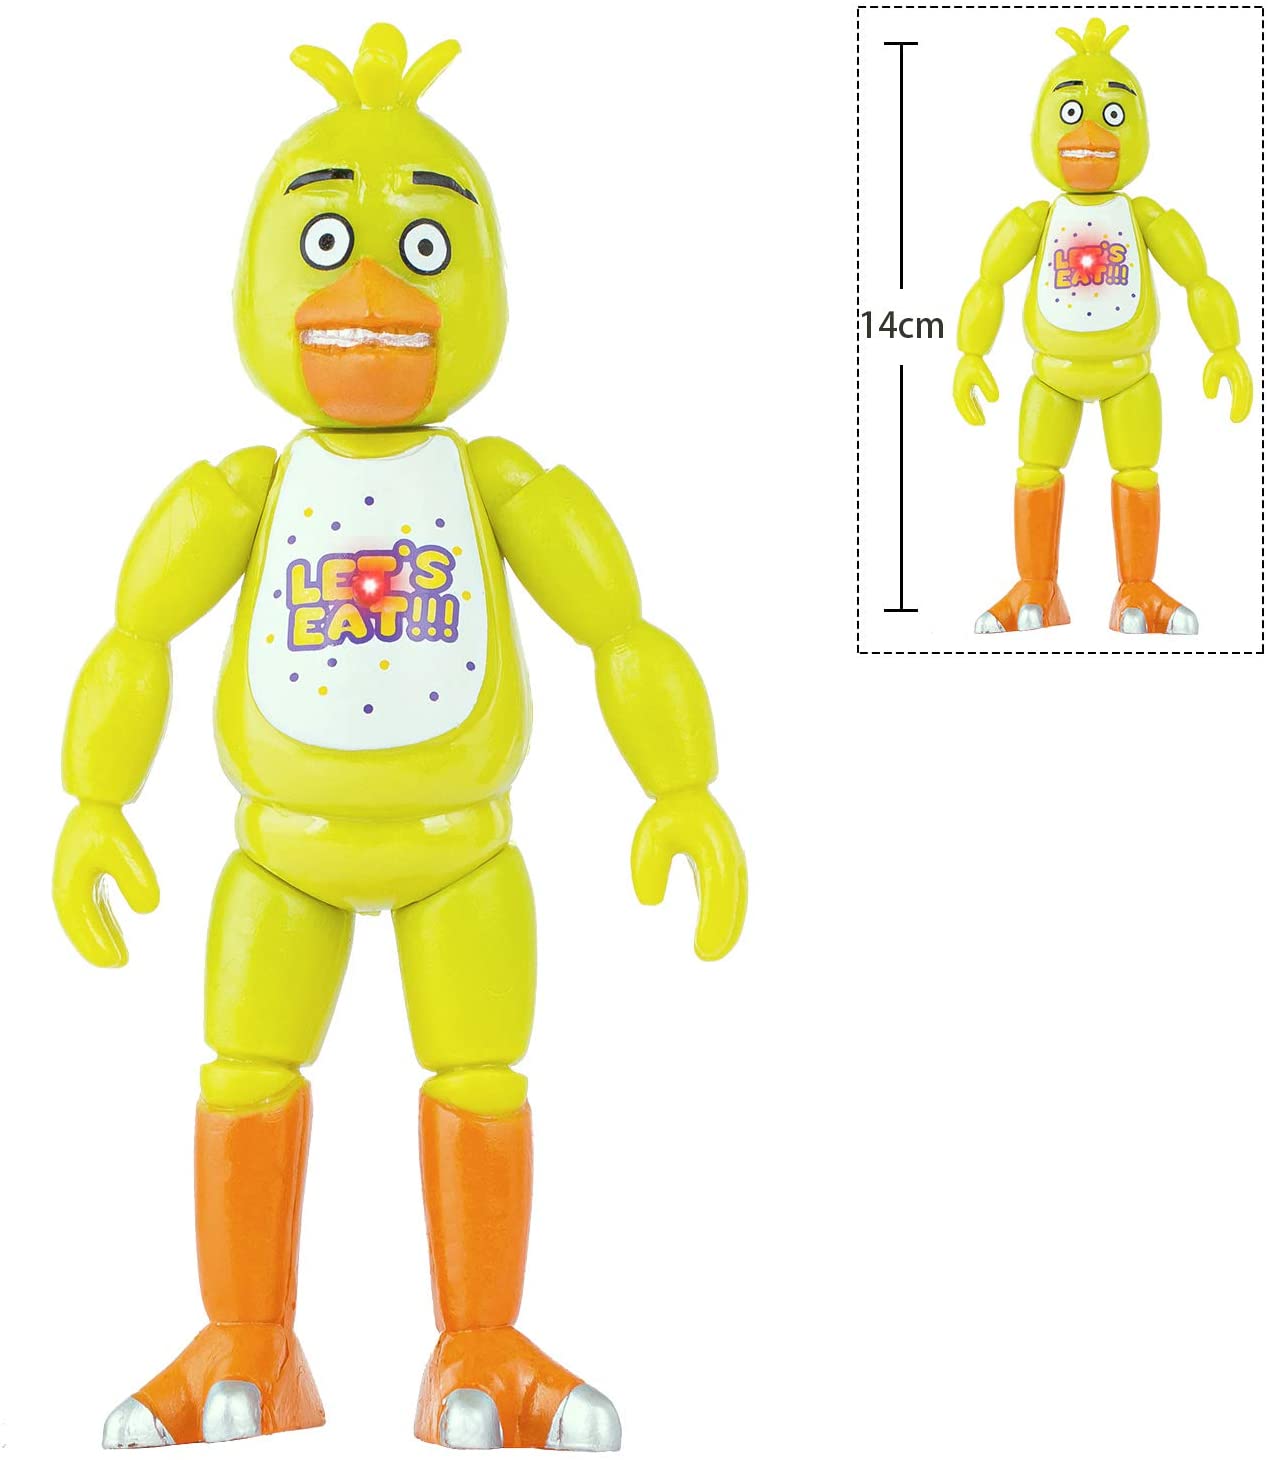 Figures of Five Nights at Freddys